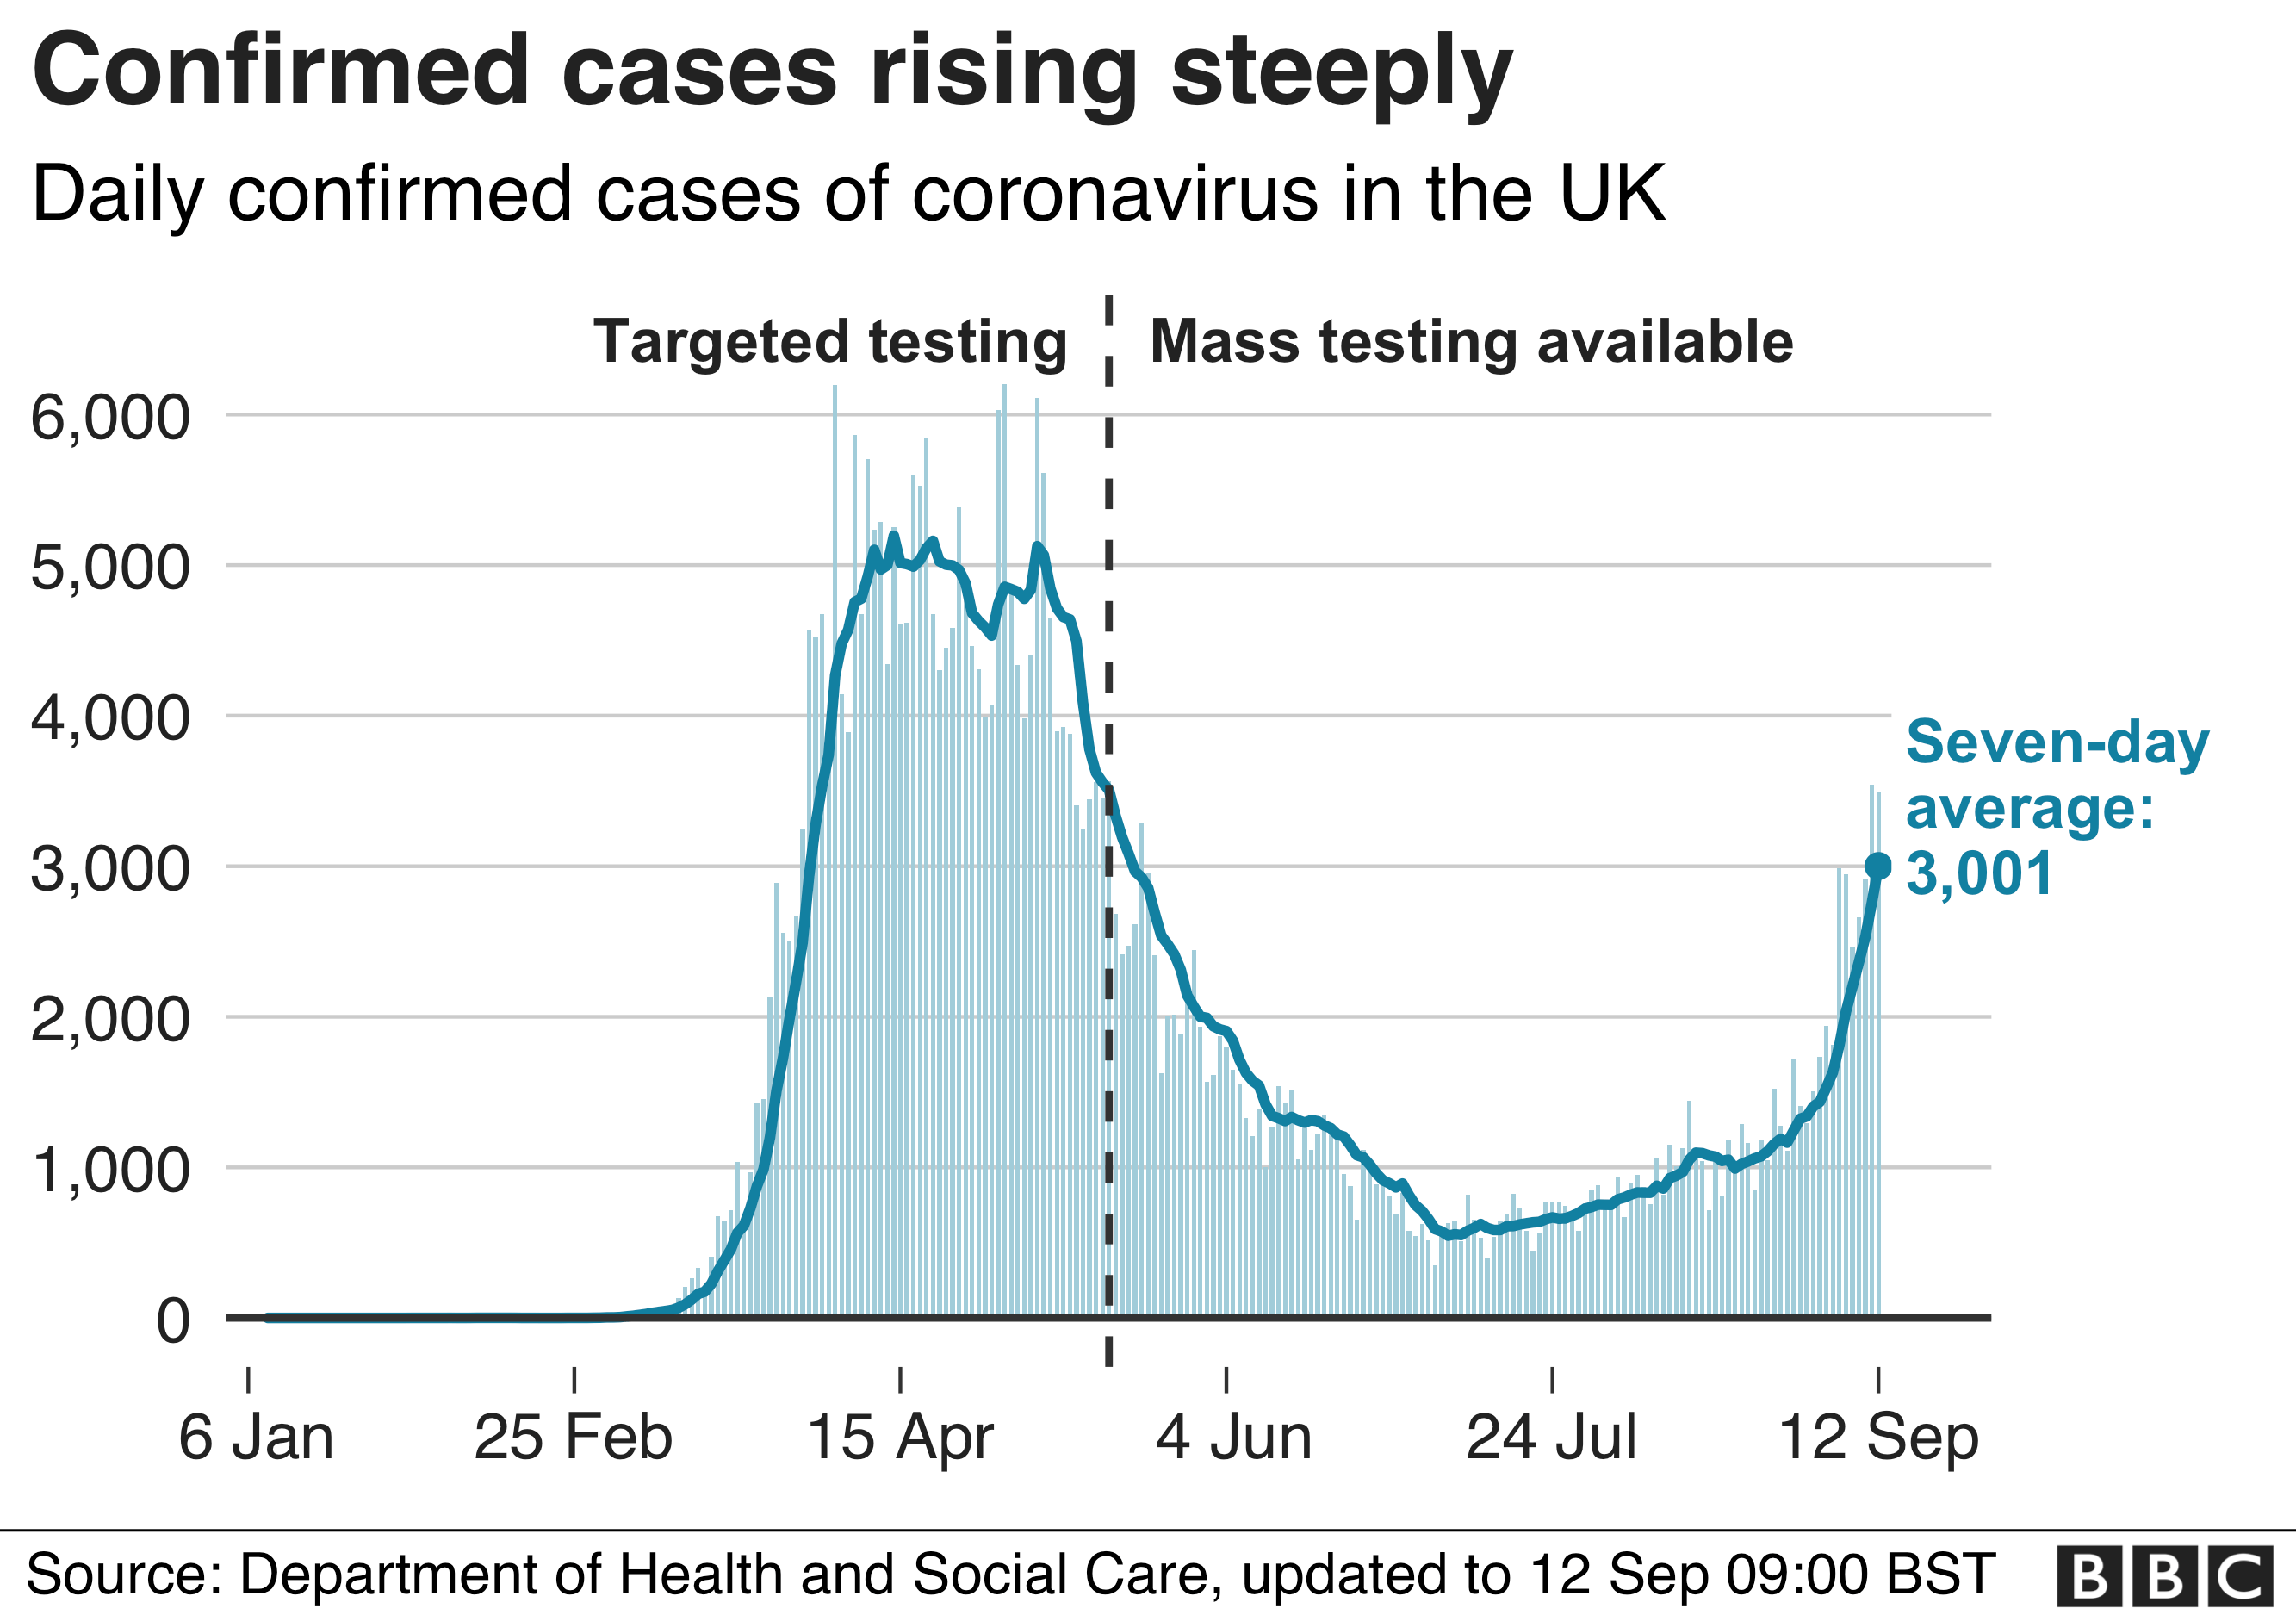 Chart showing confirmed cases in the UK are rising steeply